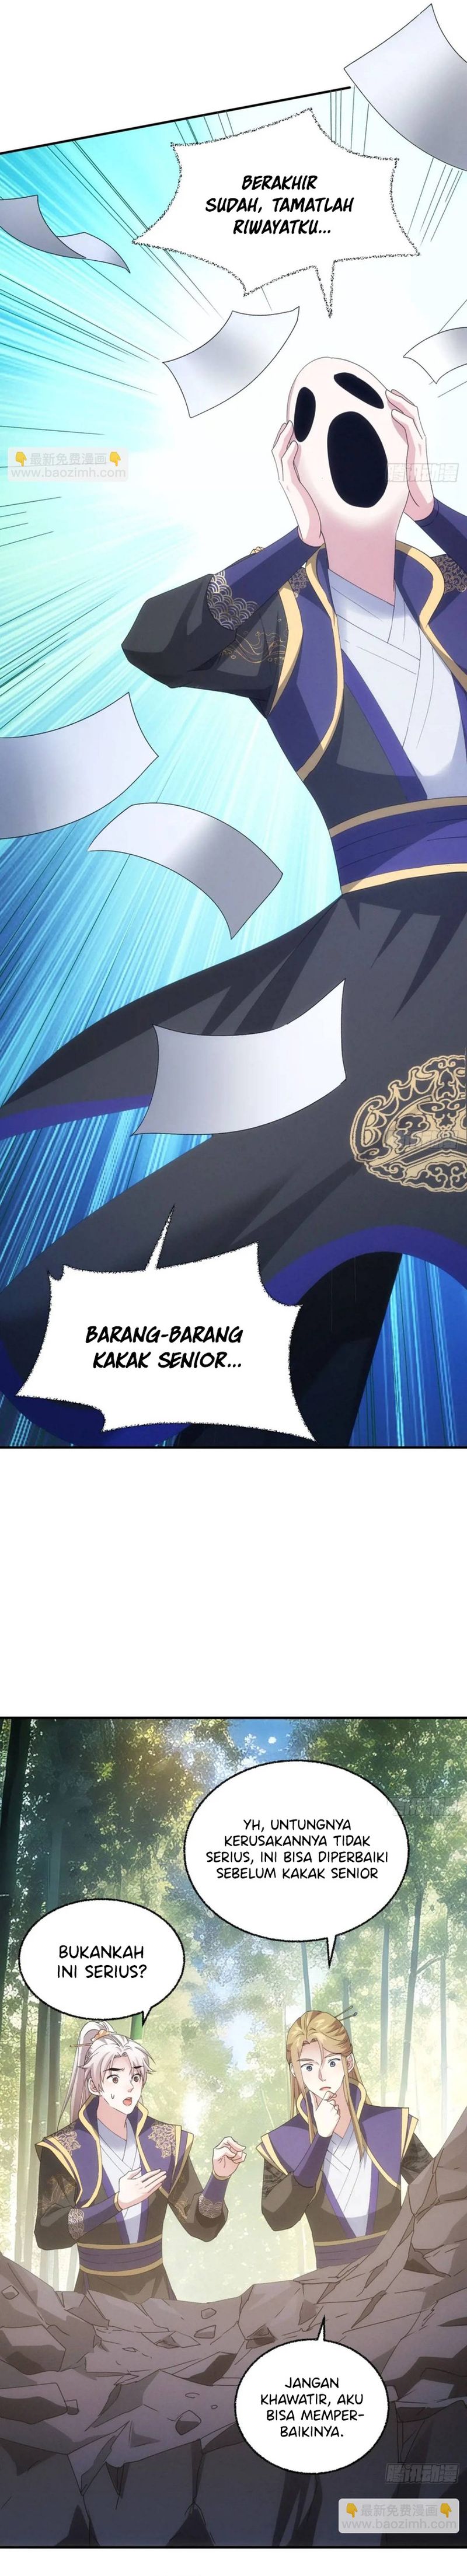 Dilarang COPAS - situs resmi www.mangacanblog.com - Komik i just dont play the card according to the routine 199 - chapter 199 200 Indonesia i just dont play the card according to the routine 199 - chapter 199 Terbaru 8|Baca Manga Komik Indonesia|Mangacan